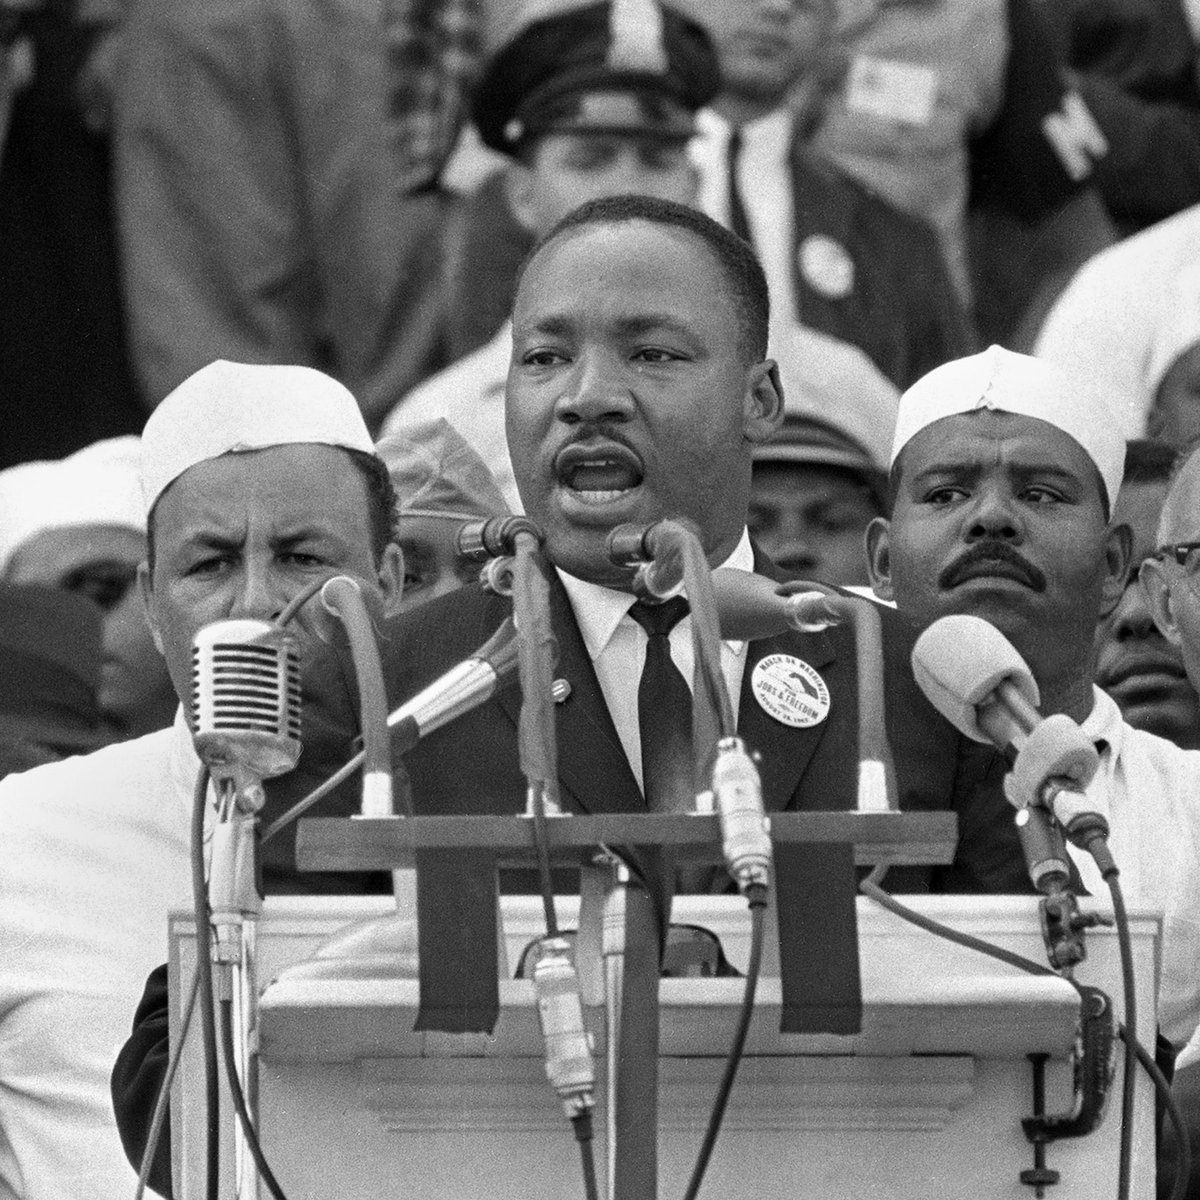 Very few humans have made such an impact on the world #HappyMLKDay “never forget to dream, even when others won’t let you” 🇺🇸